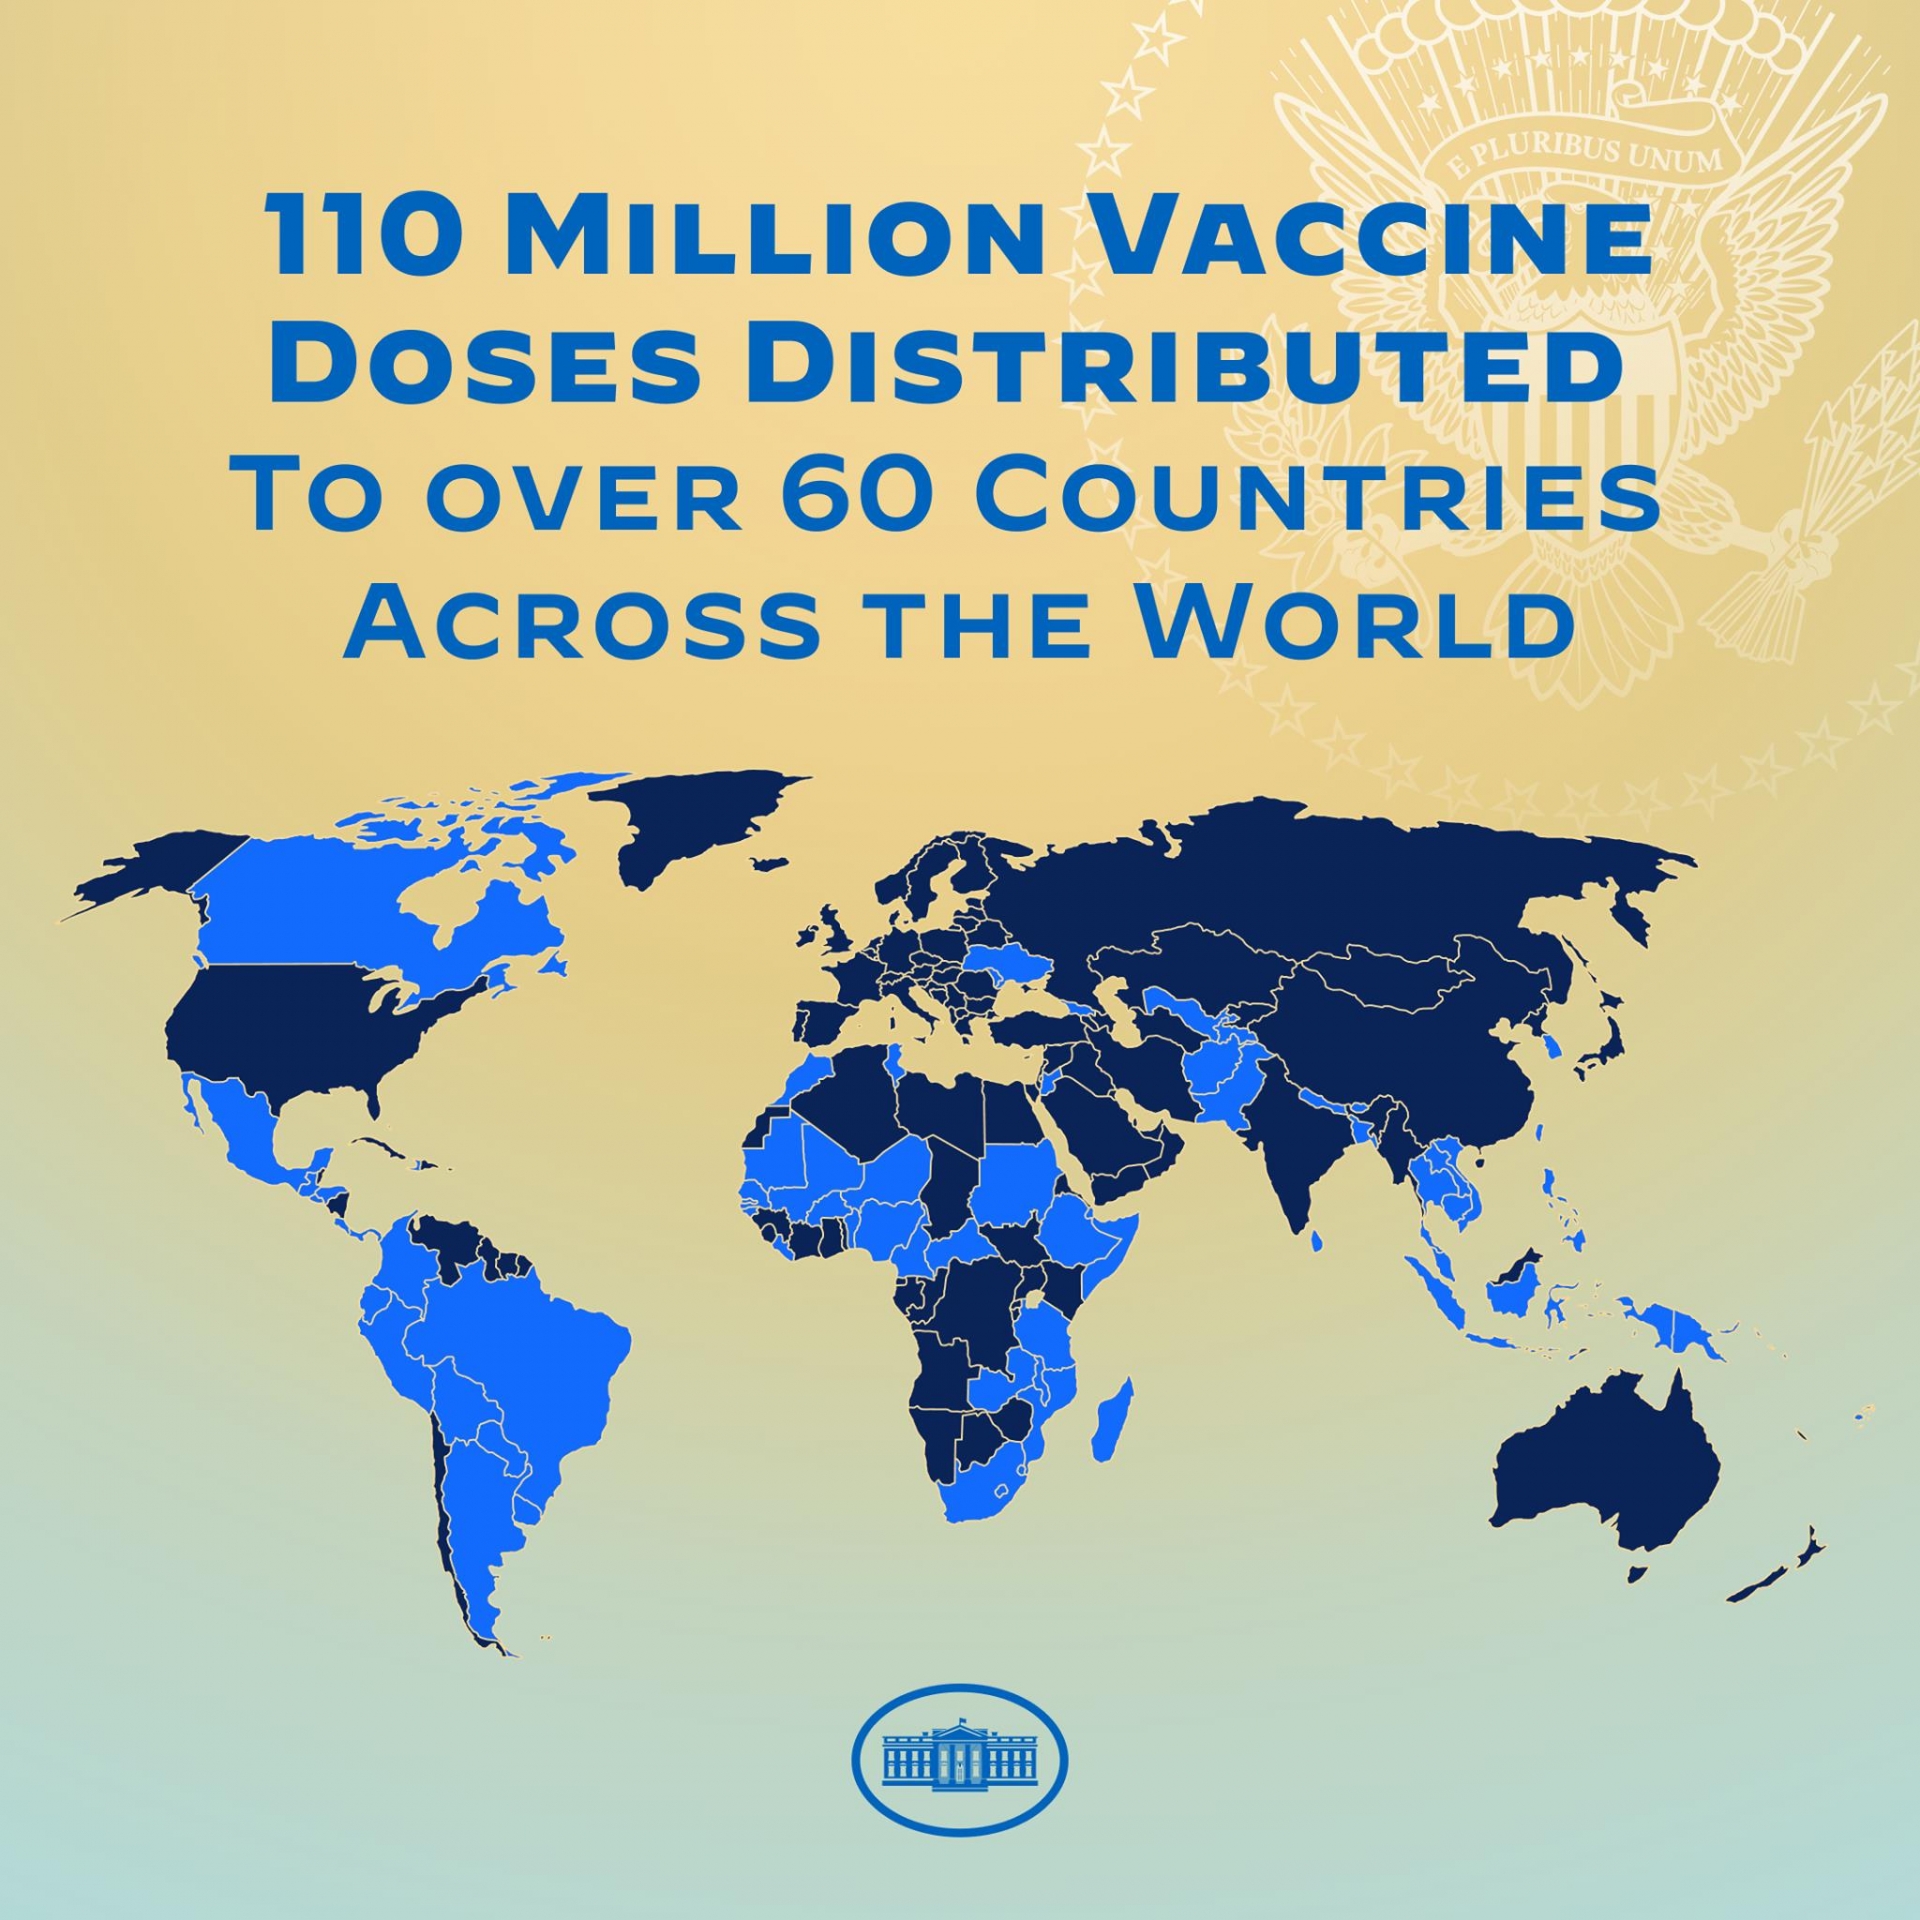 USA Donates Millions of Vaccines to Countries in Need, Including Vietnam